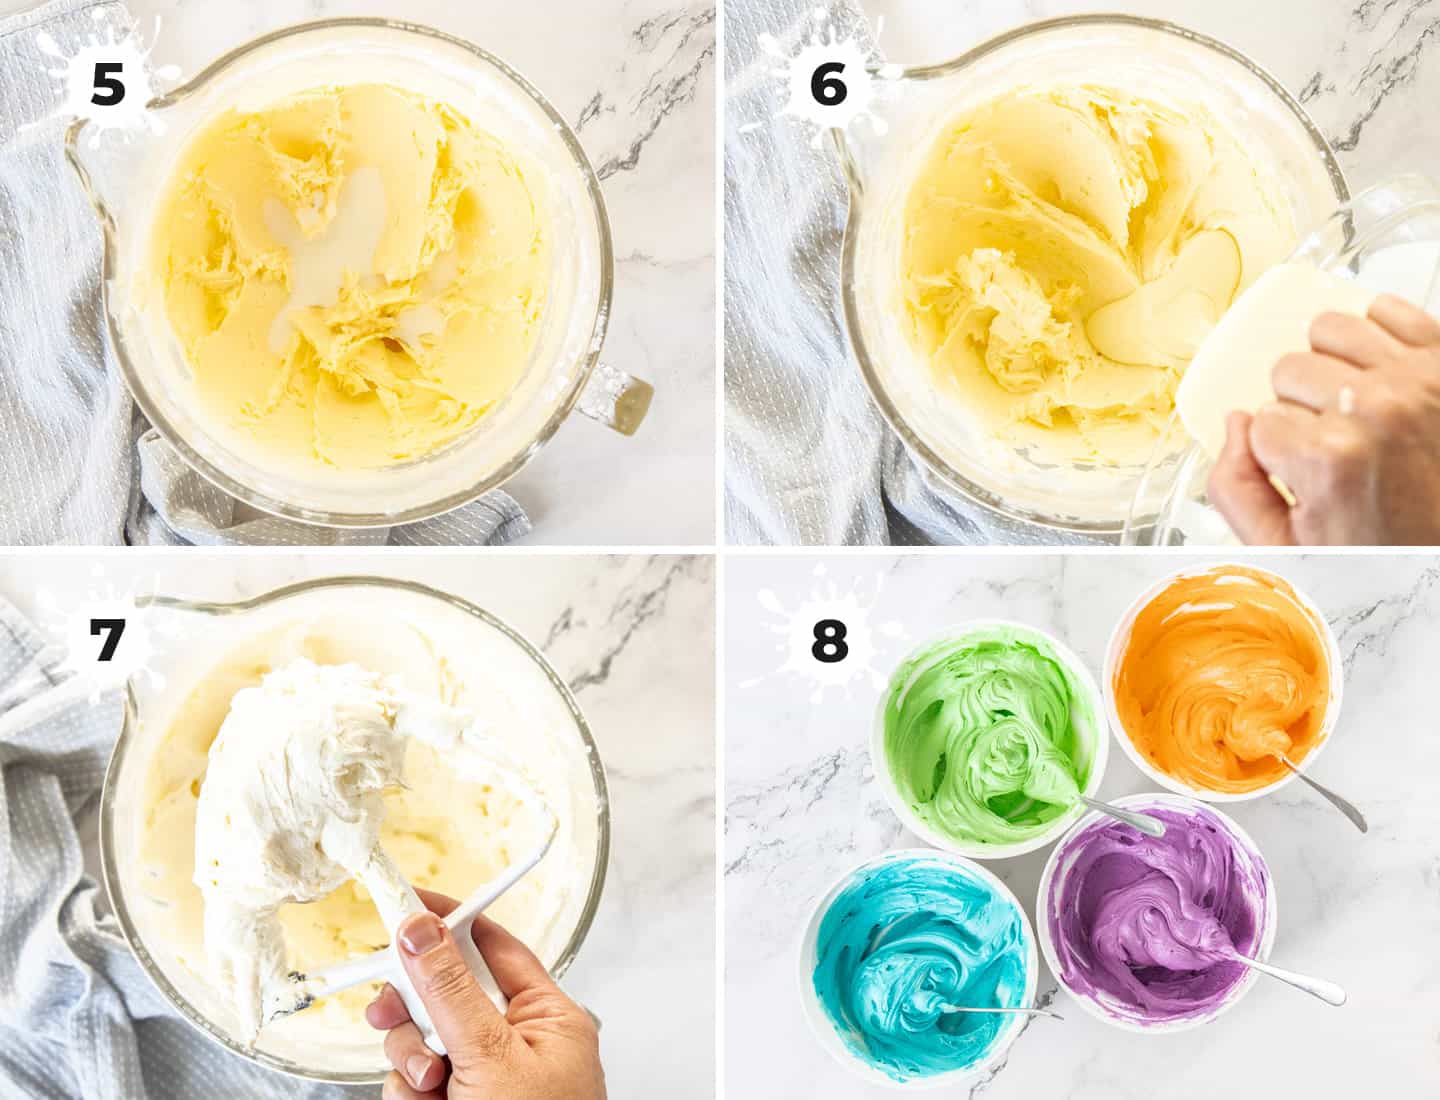 A collage of 4 images showing how to make the whipped white chocolate frosting.